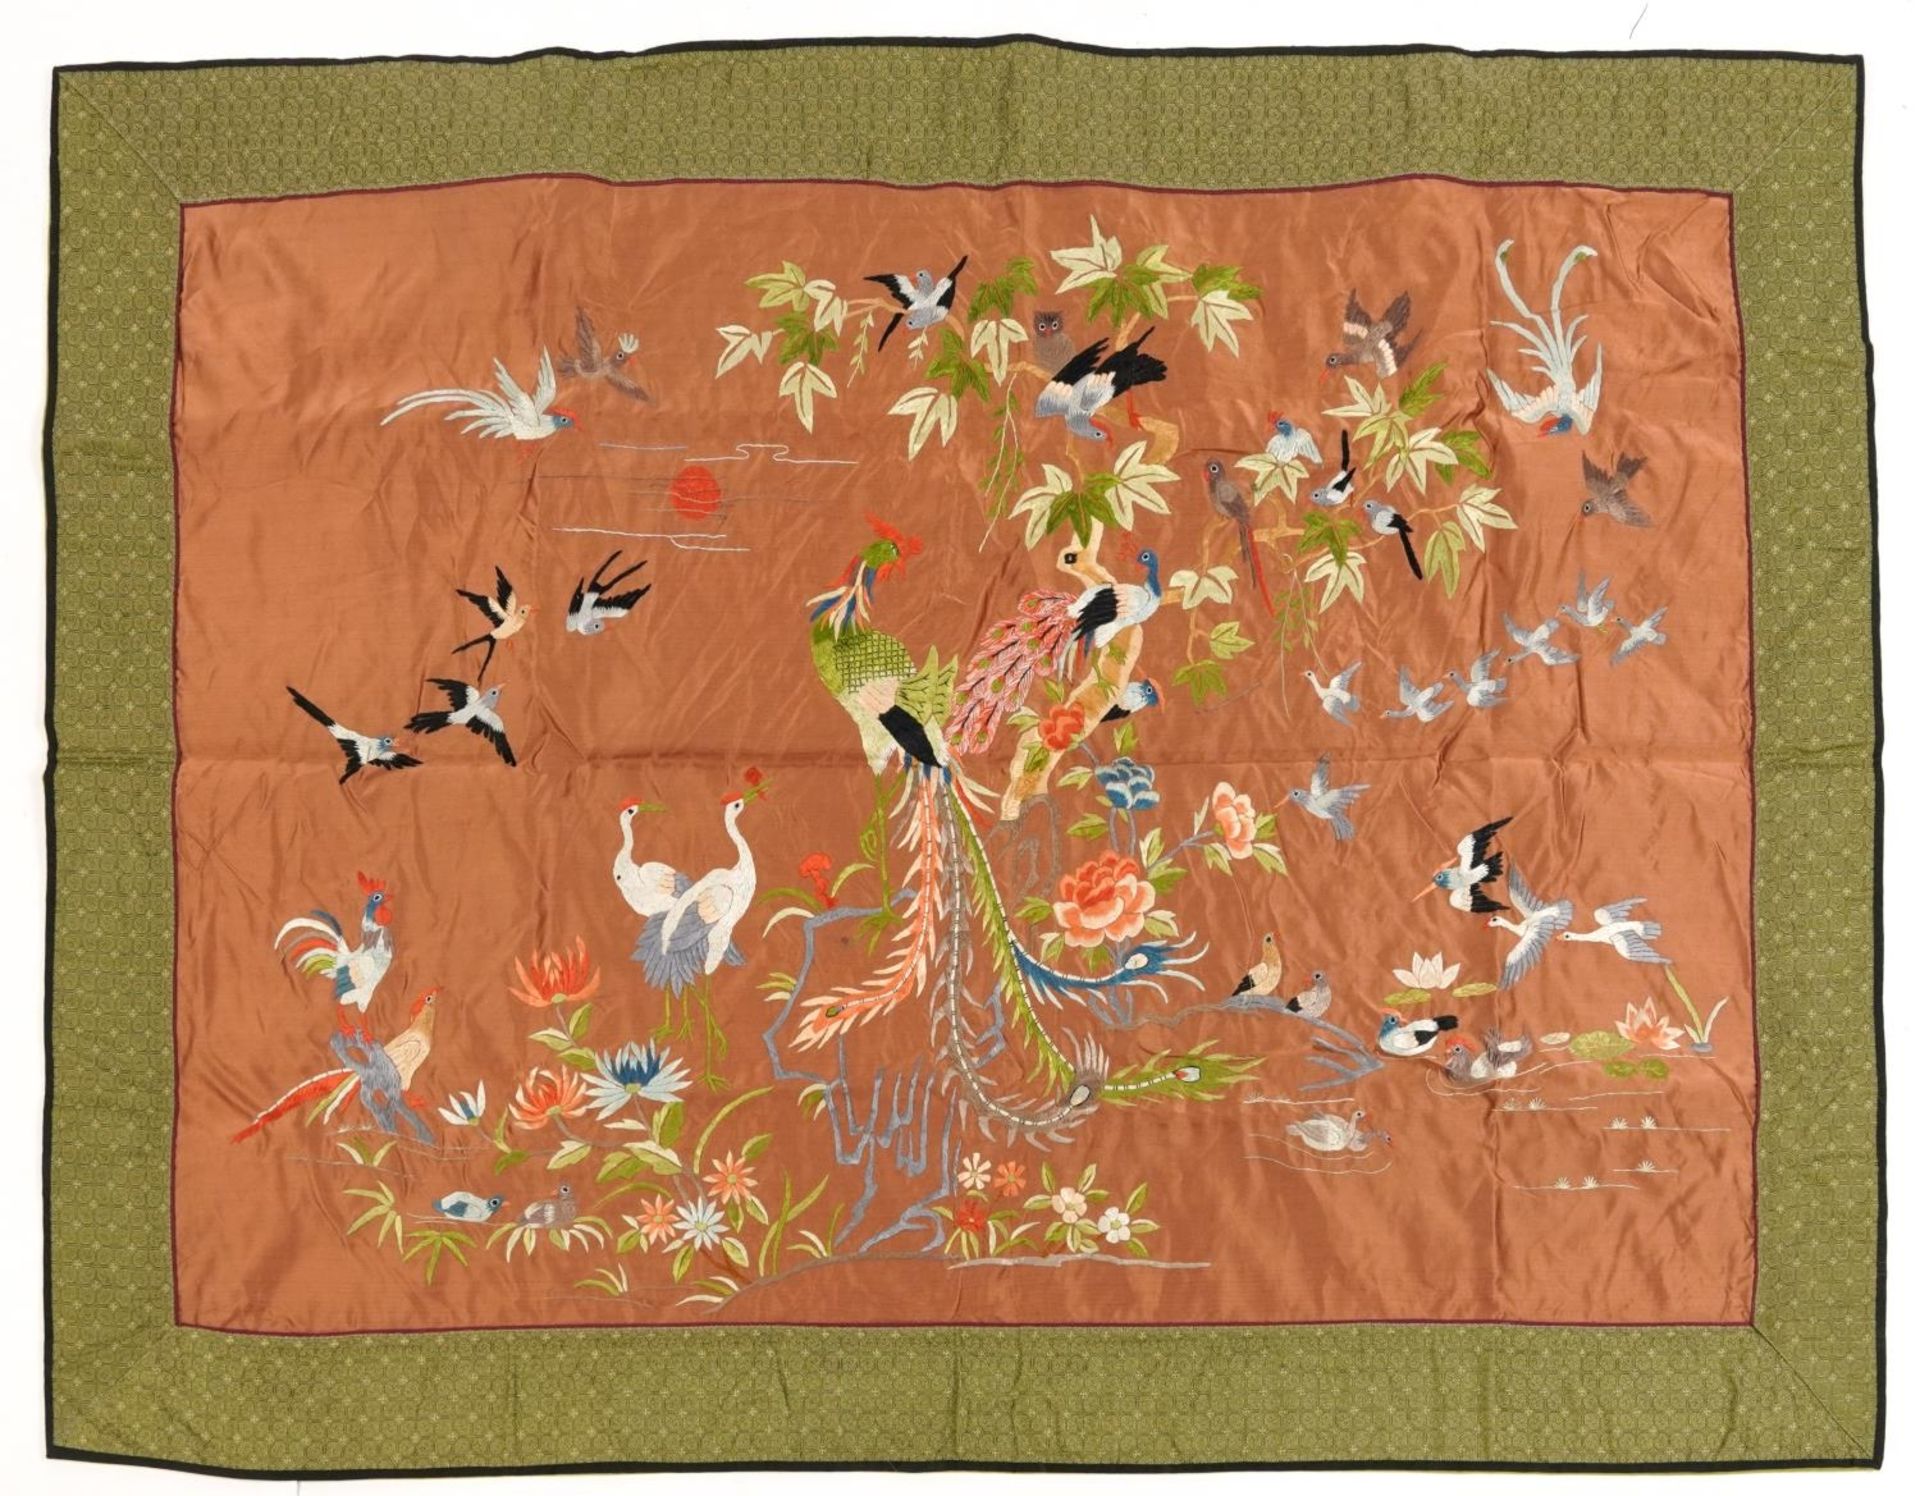 Large Chinese silk panel embroidered with birds of paradise amongst ducklings in water and